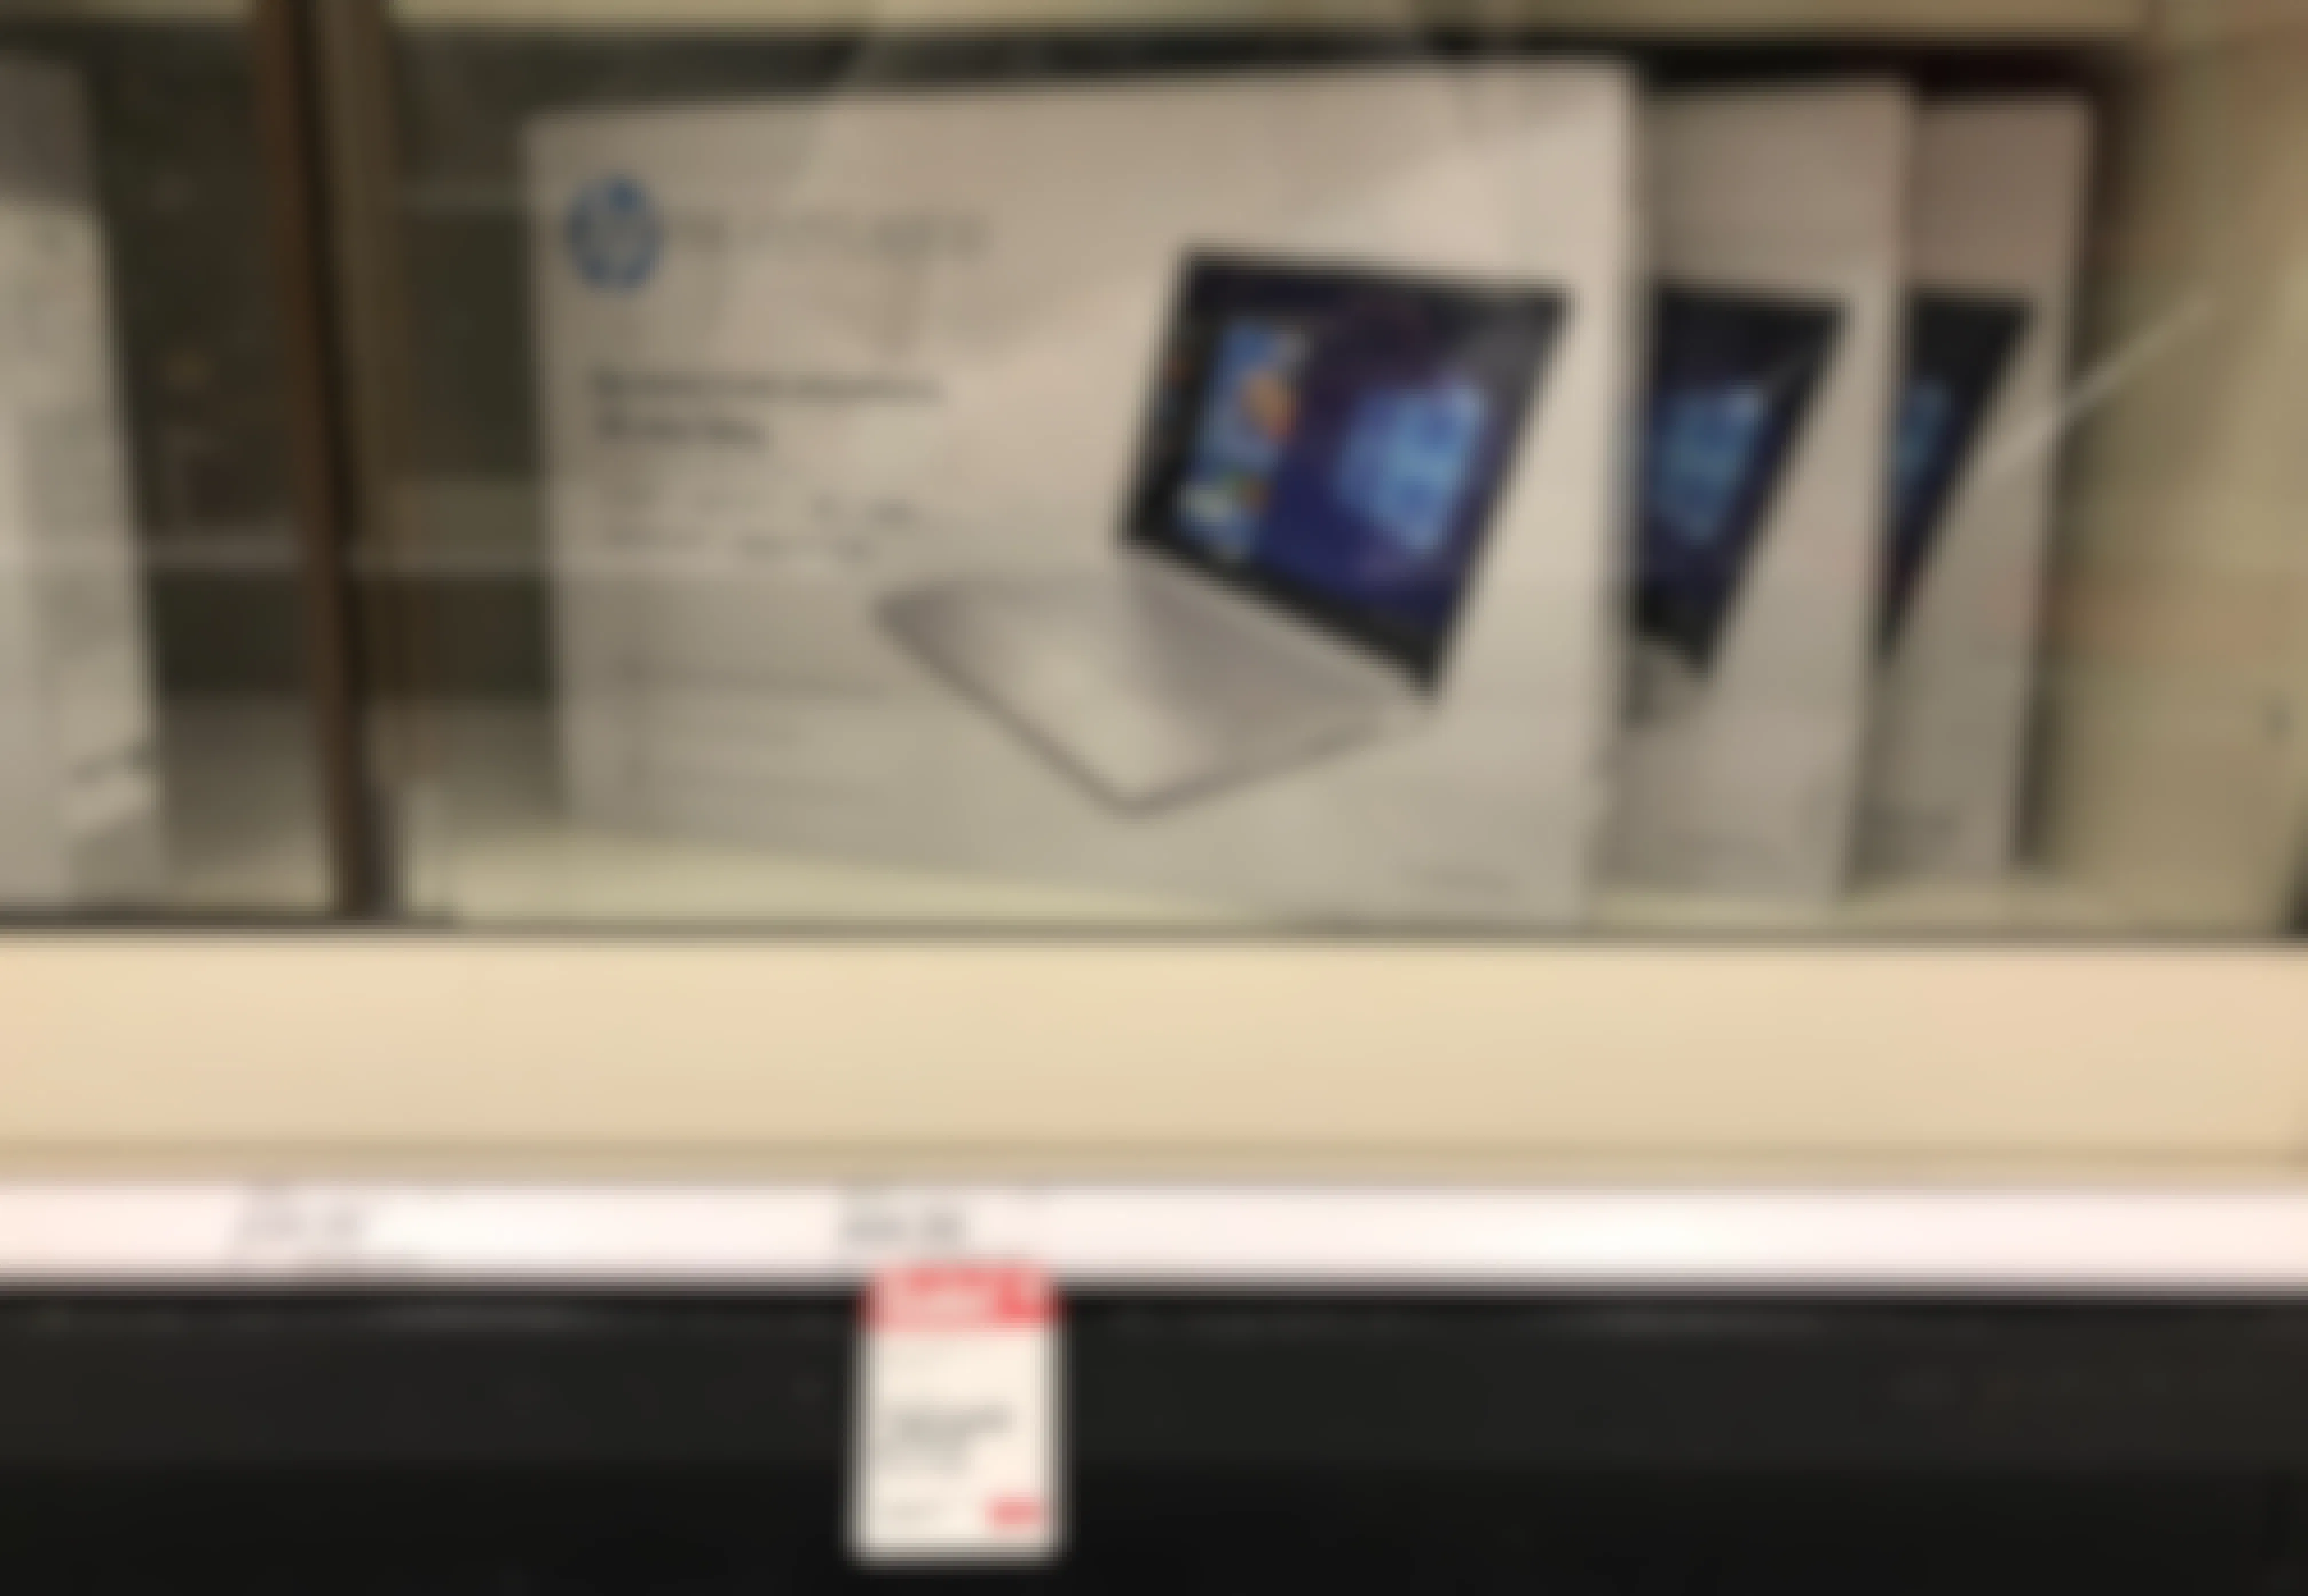 Some HP 14-Inch Windows Laptops in a locked case in the electronics department of Target.